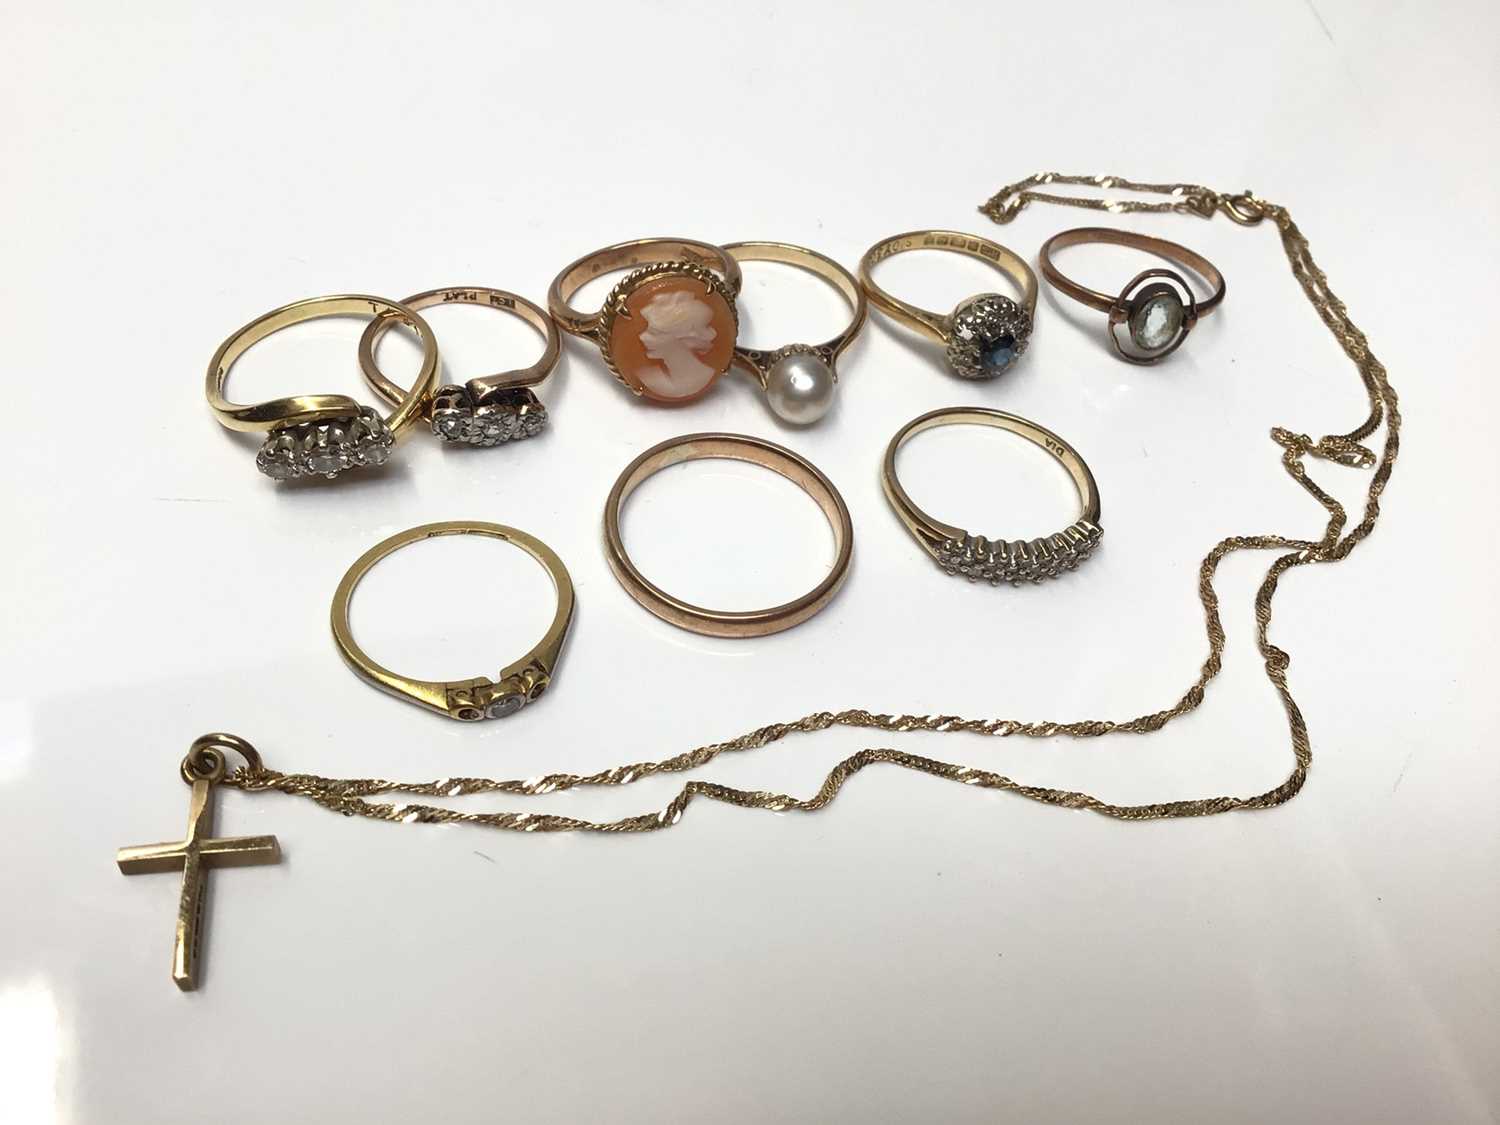 Lot 58 - Group of gold rings to include three 18ct gold rings, six 9ct gold rings and 9ct gold cross on chain